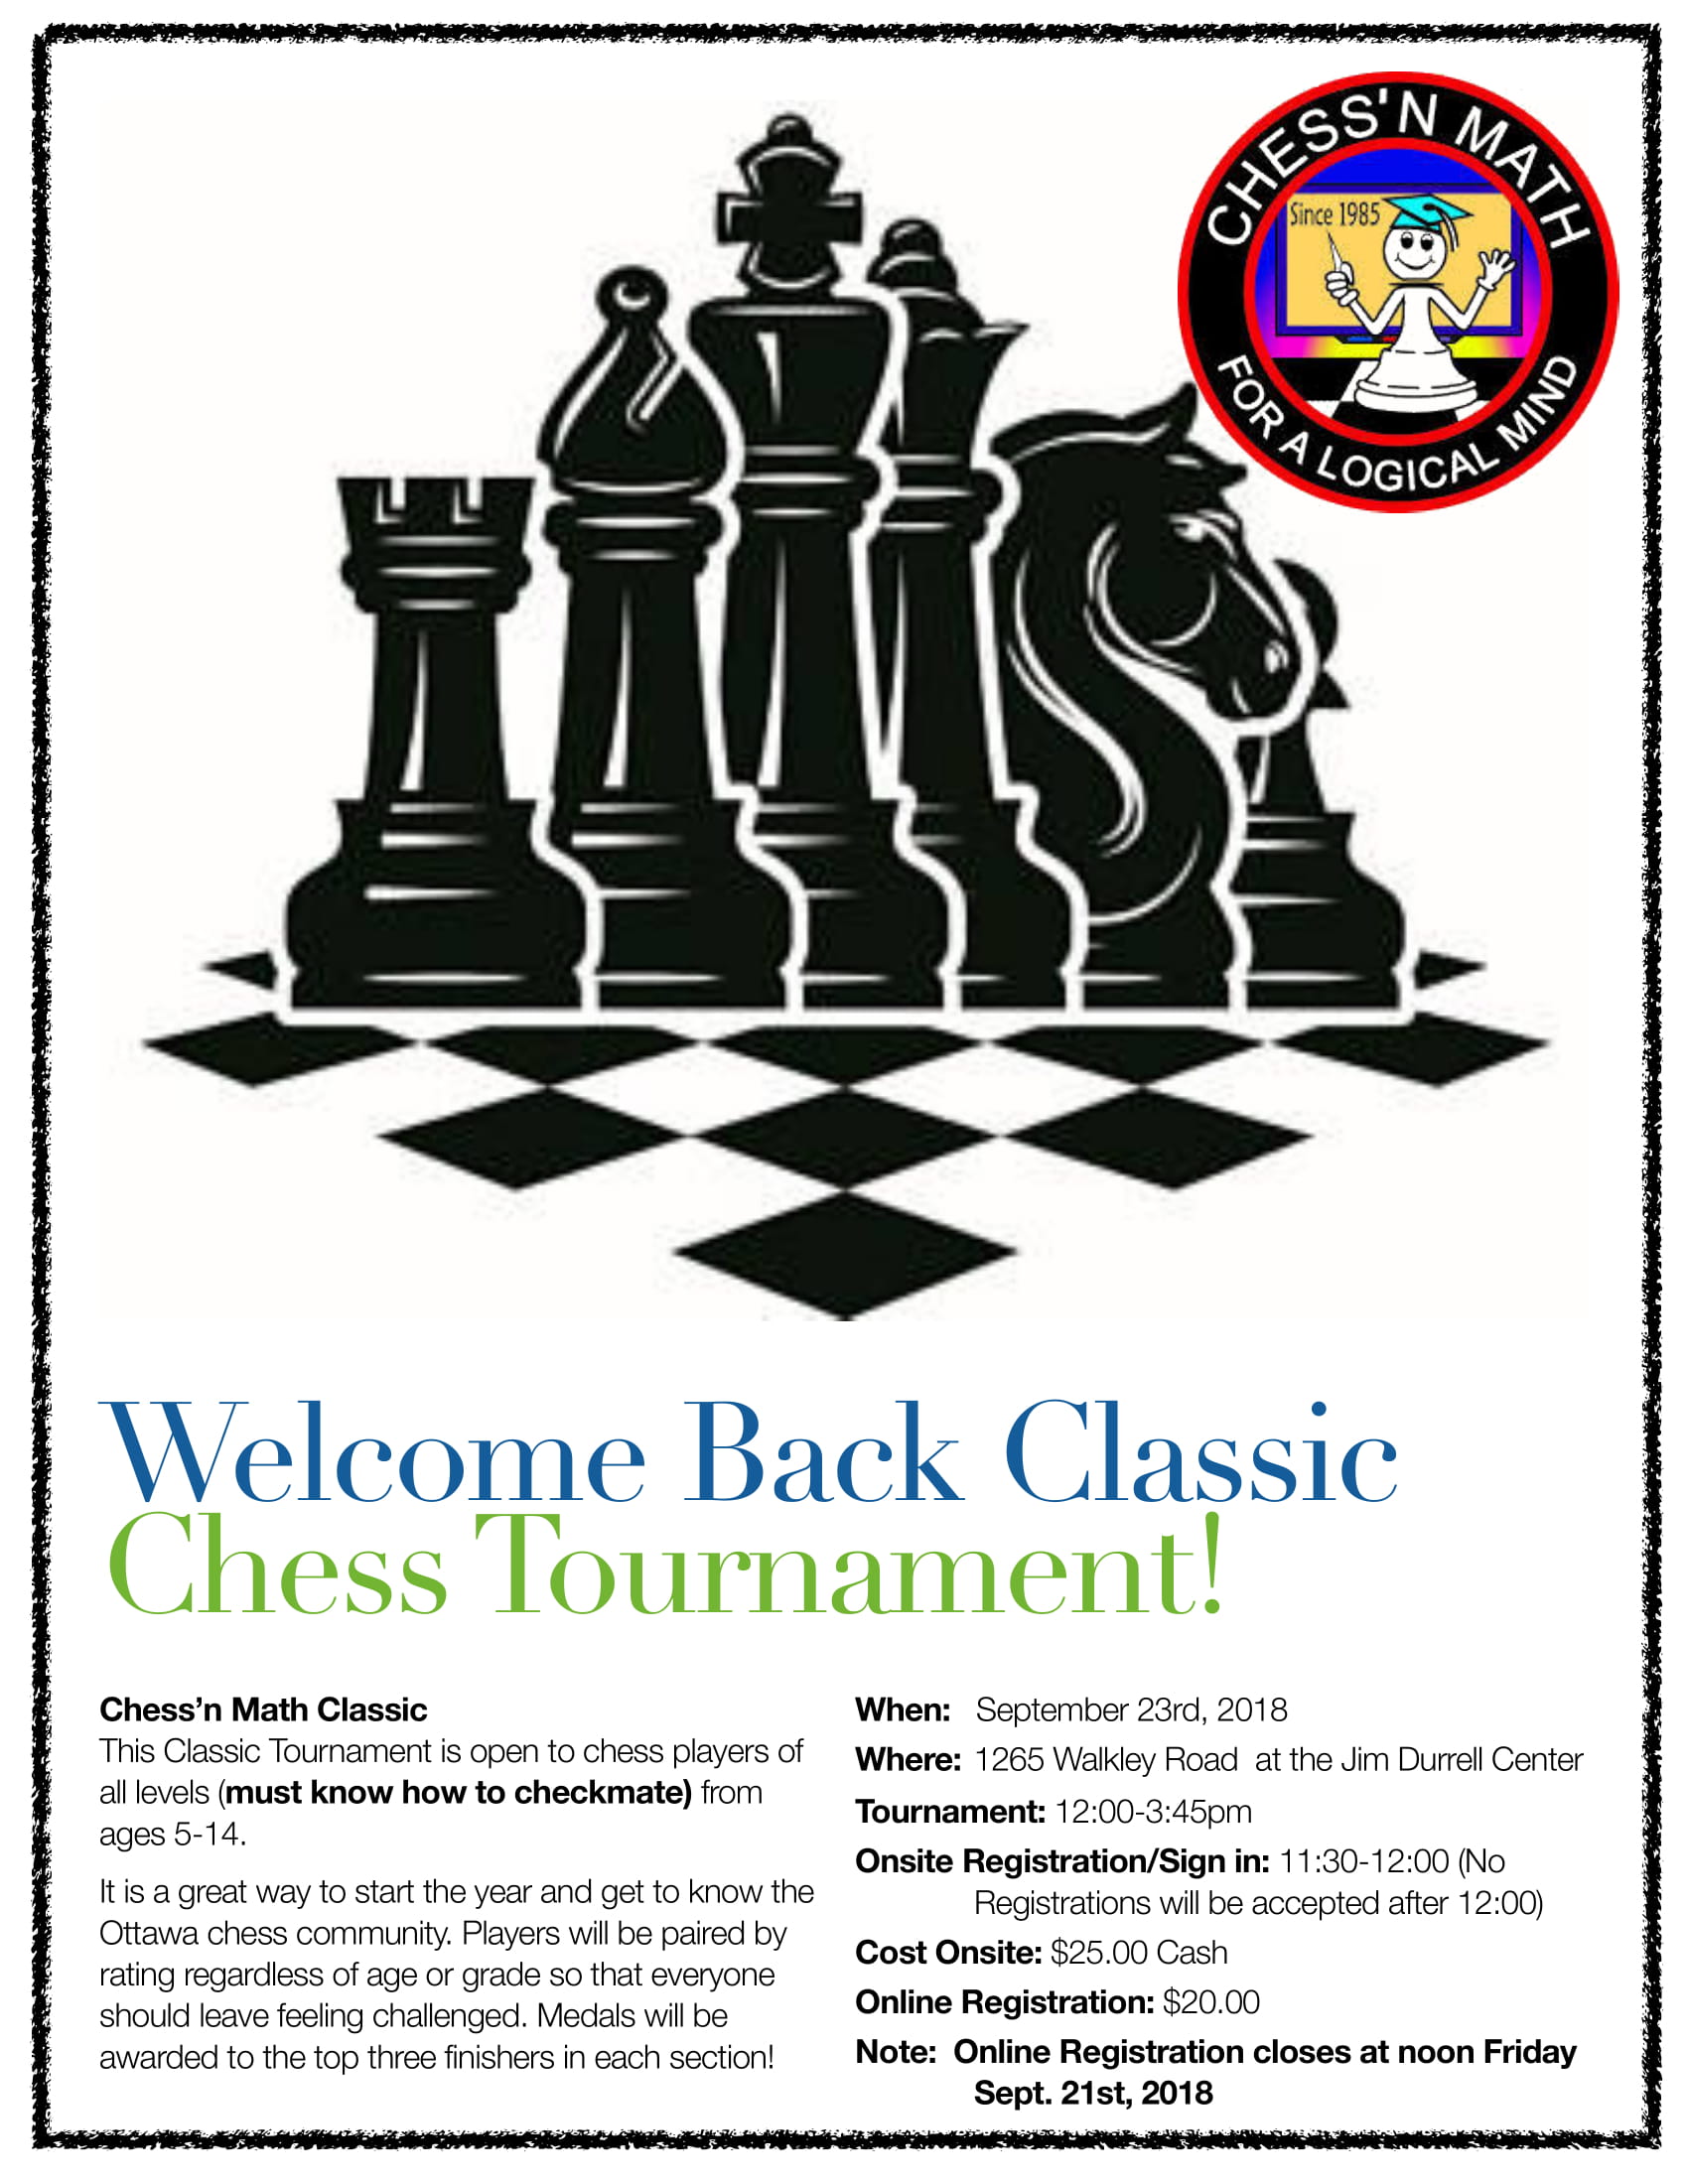 Welcome Back Classic Tournament Fall 2018